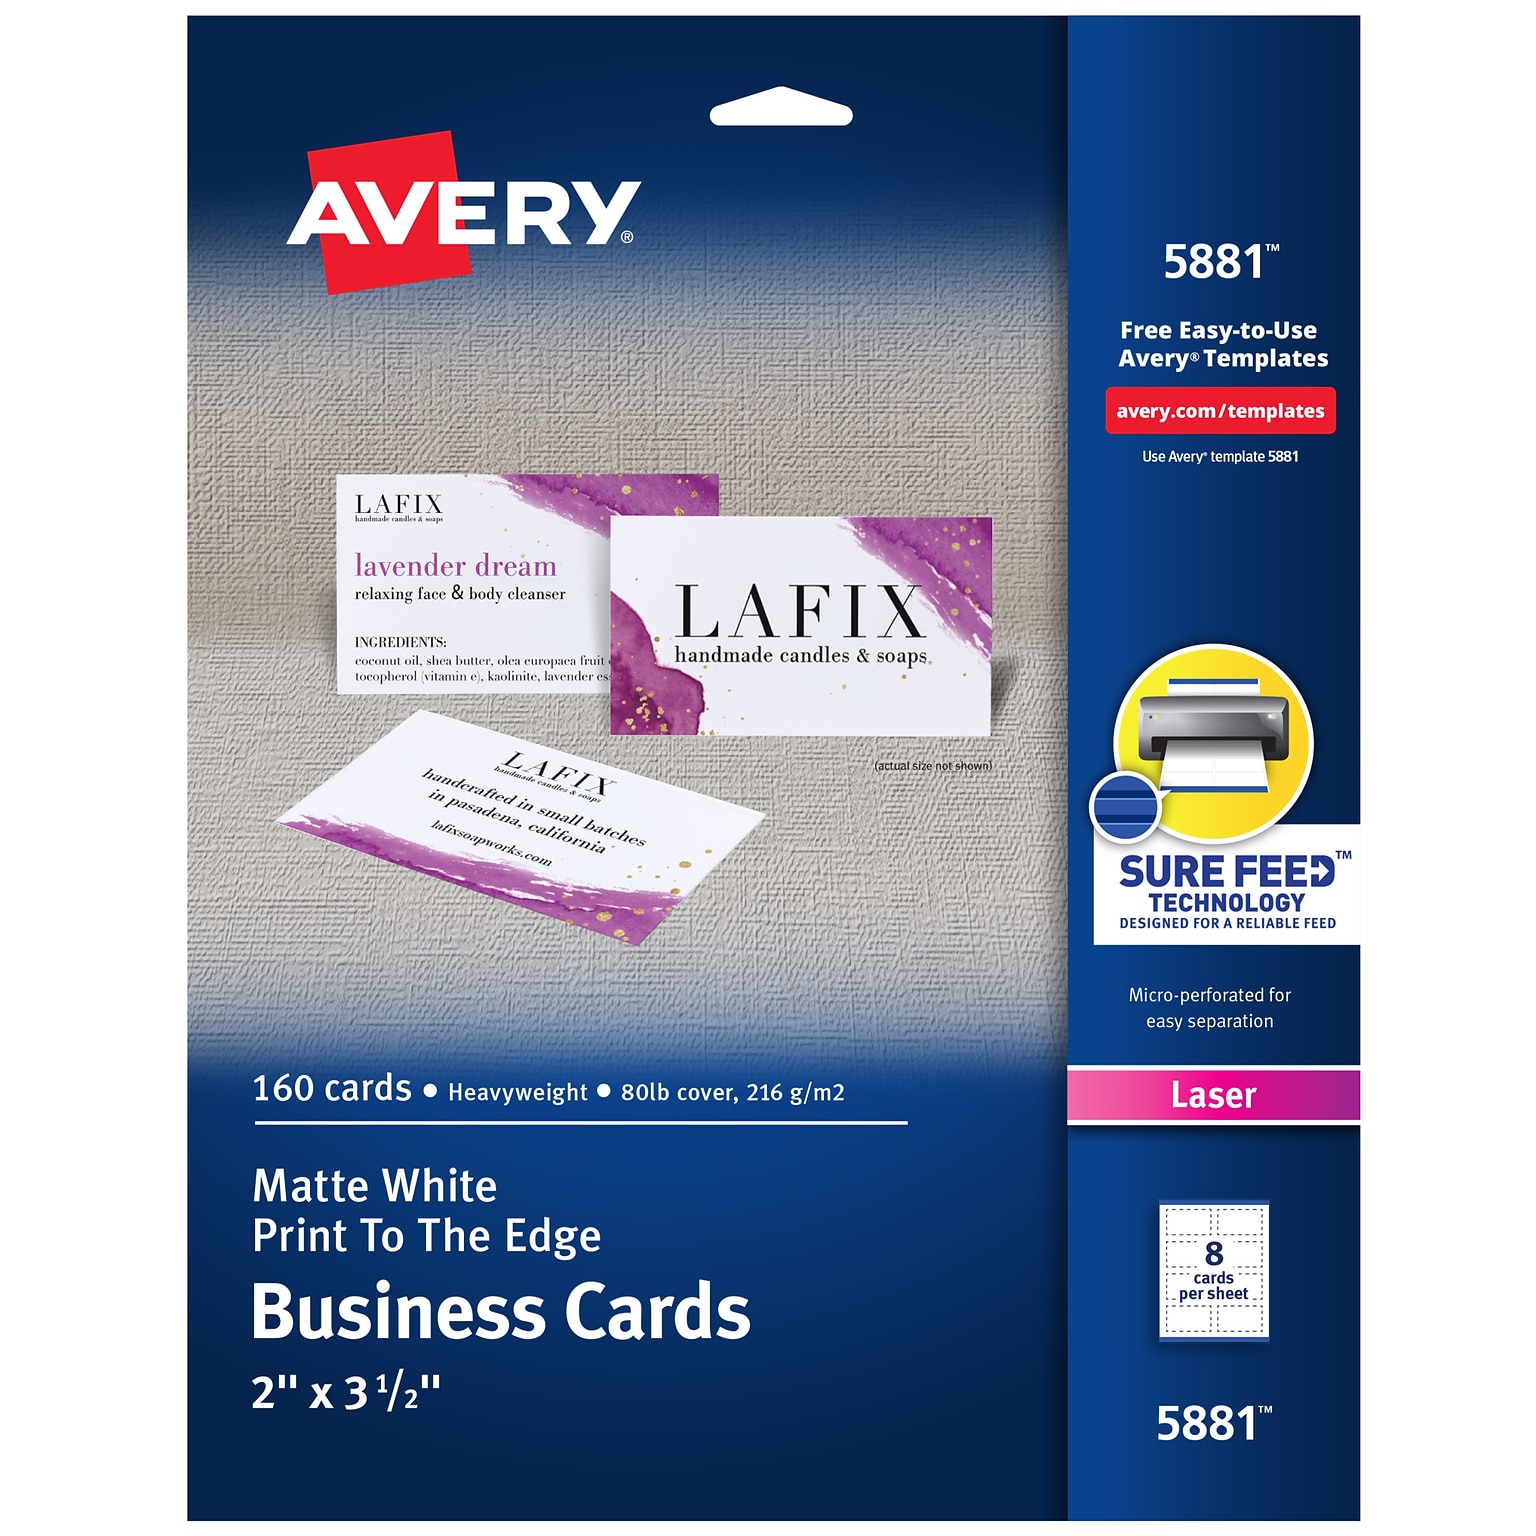 Avery Print-to-the-Edge Business Cards, 2 x 3 1/2, Matte White, 160 Per Pack (5881)